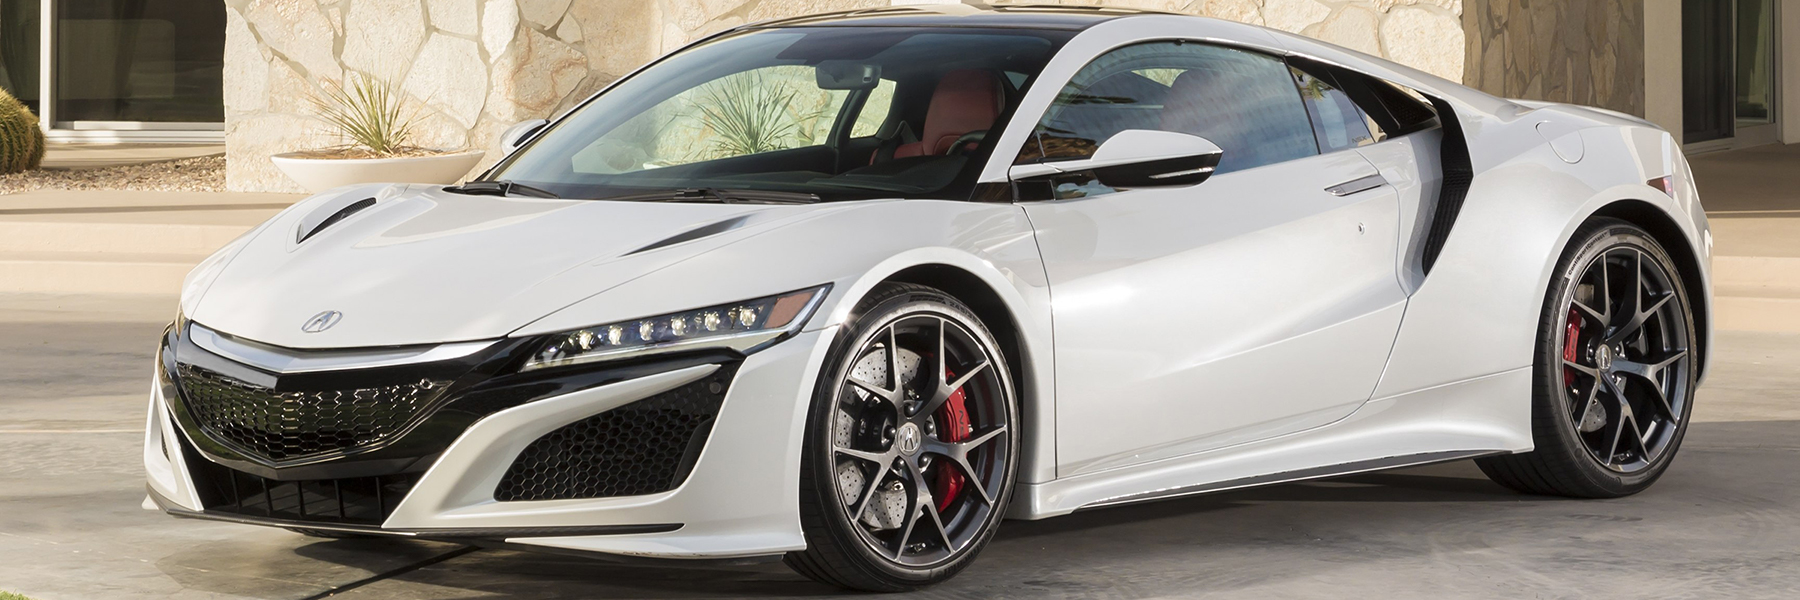 White 2018 Acura NSX Front View